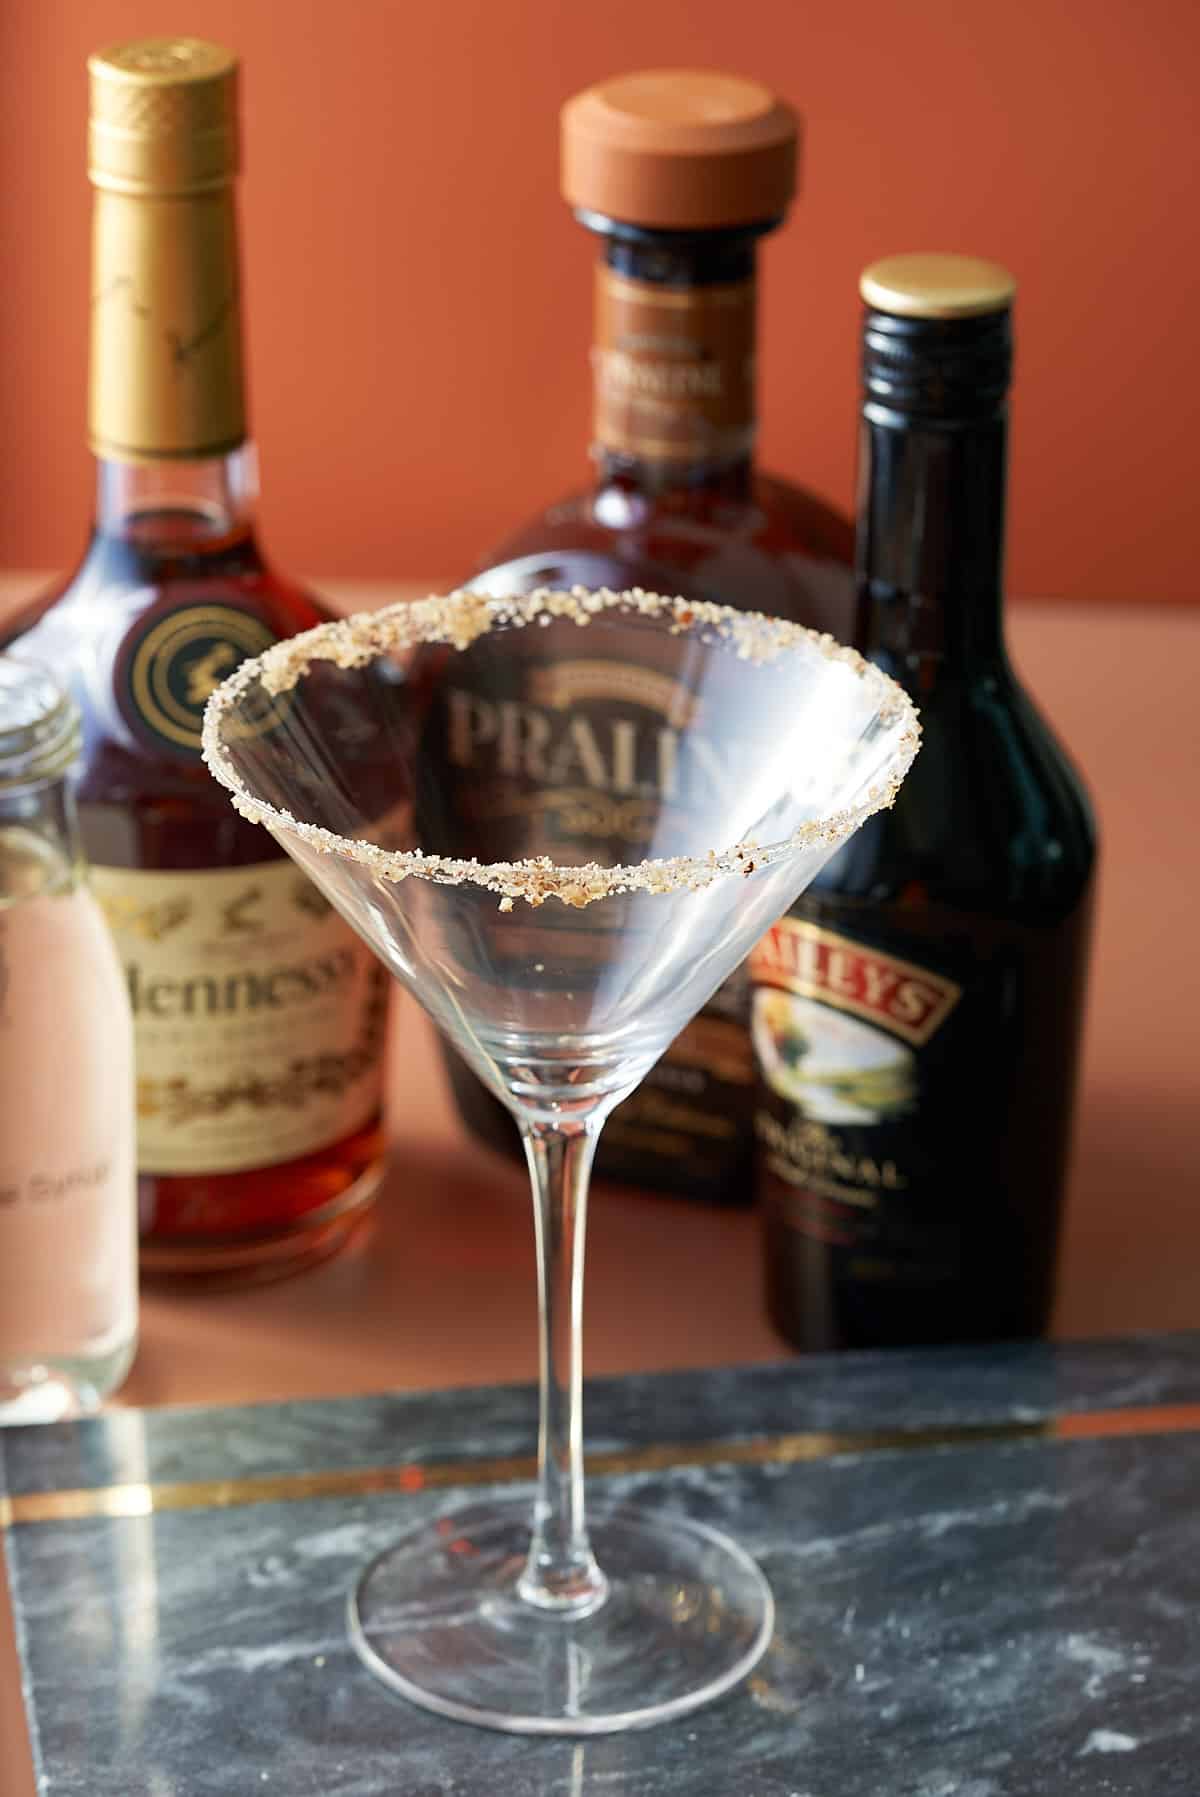 A martini glass rimmed with brown sugar and crushed pecans.